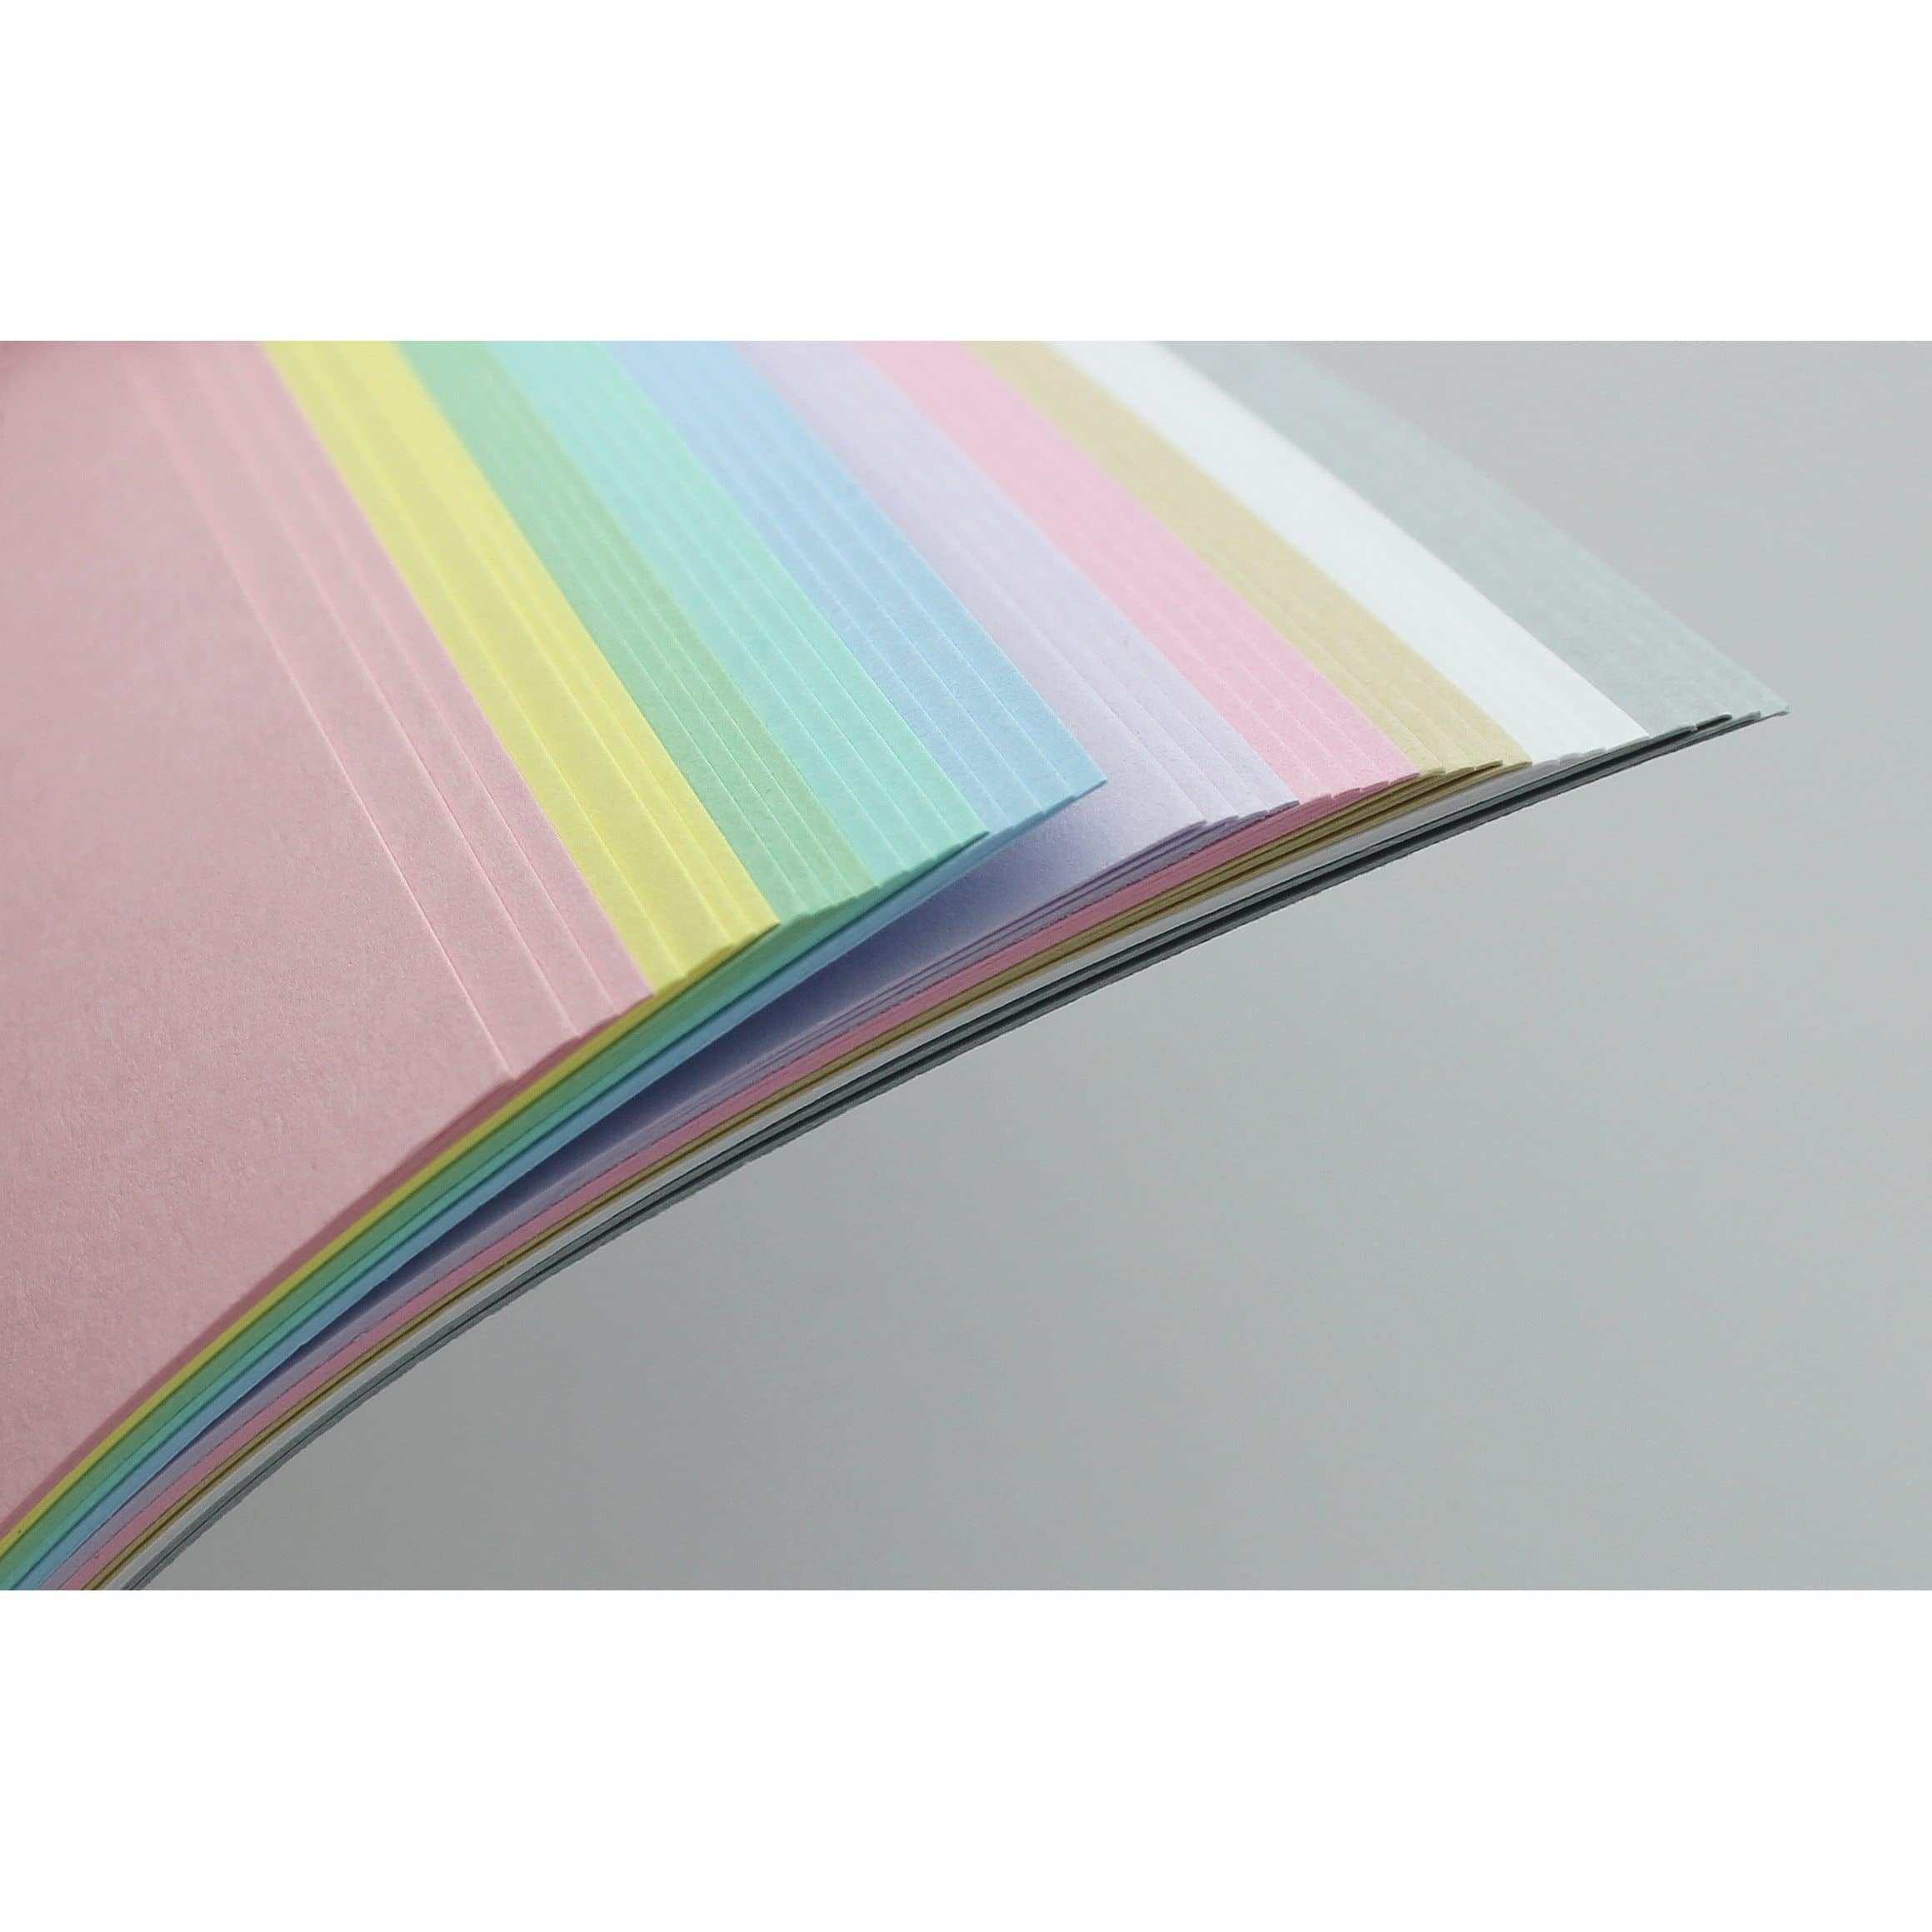 PA Paper Accents™ Radiant Duo 5'' x 7'' Cardstock Paper, 250 Sheets